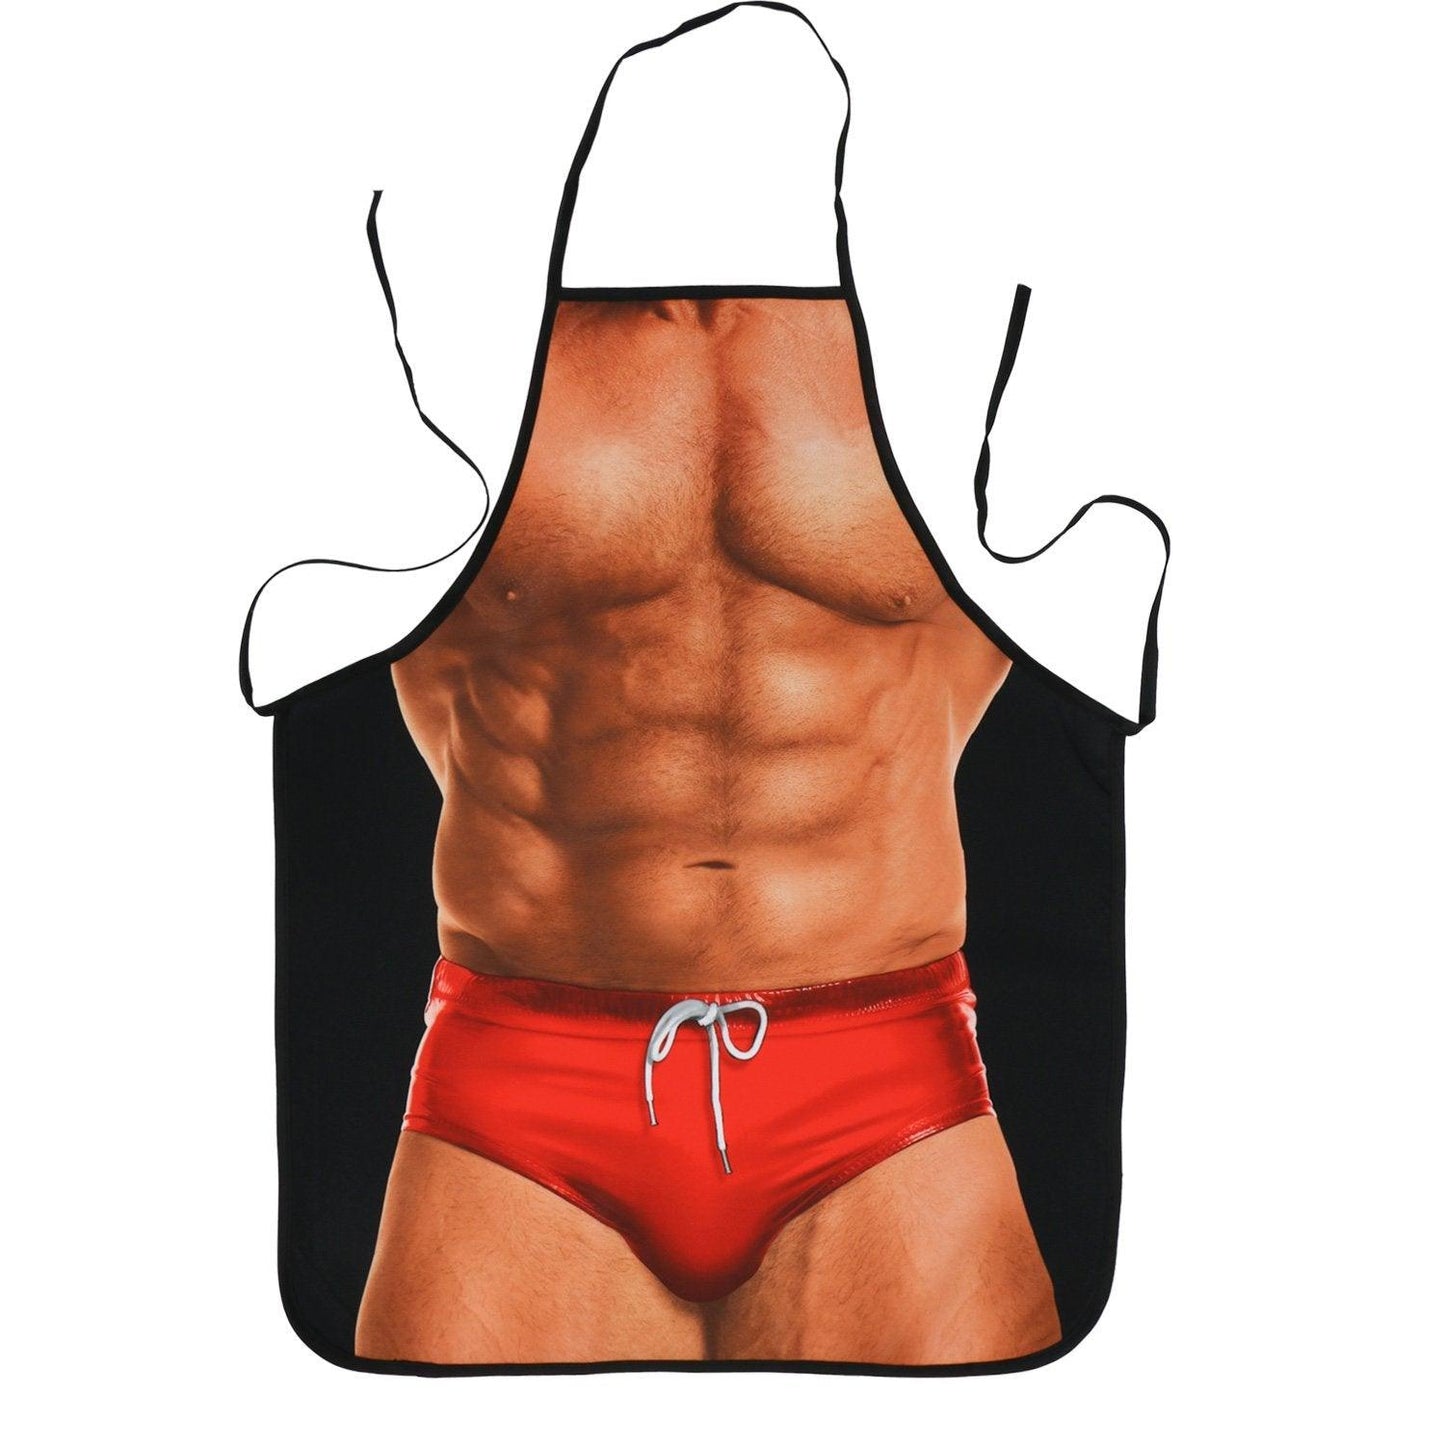 Landisun Apron Kitchen Chef Cooking Gag Gift 1 Piece of Creative Funny Grilling Baking (Macho Muscle Man) - CookCave